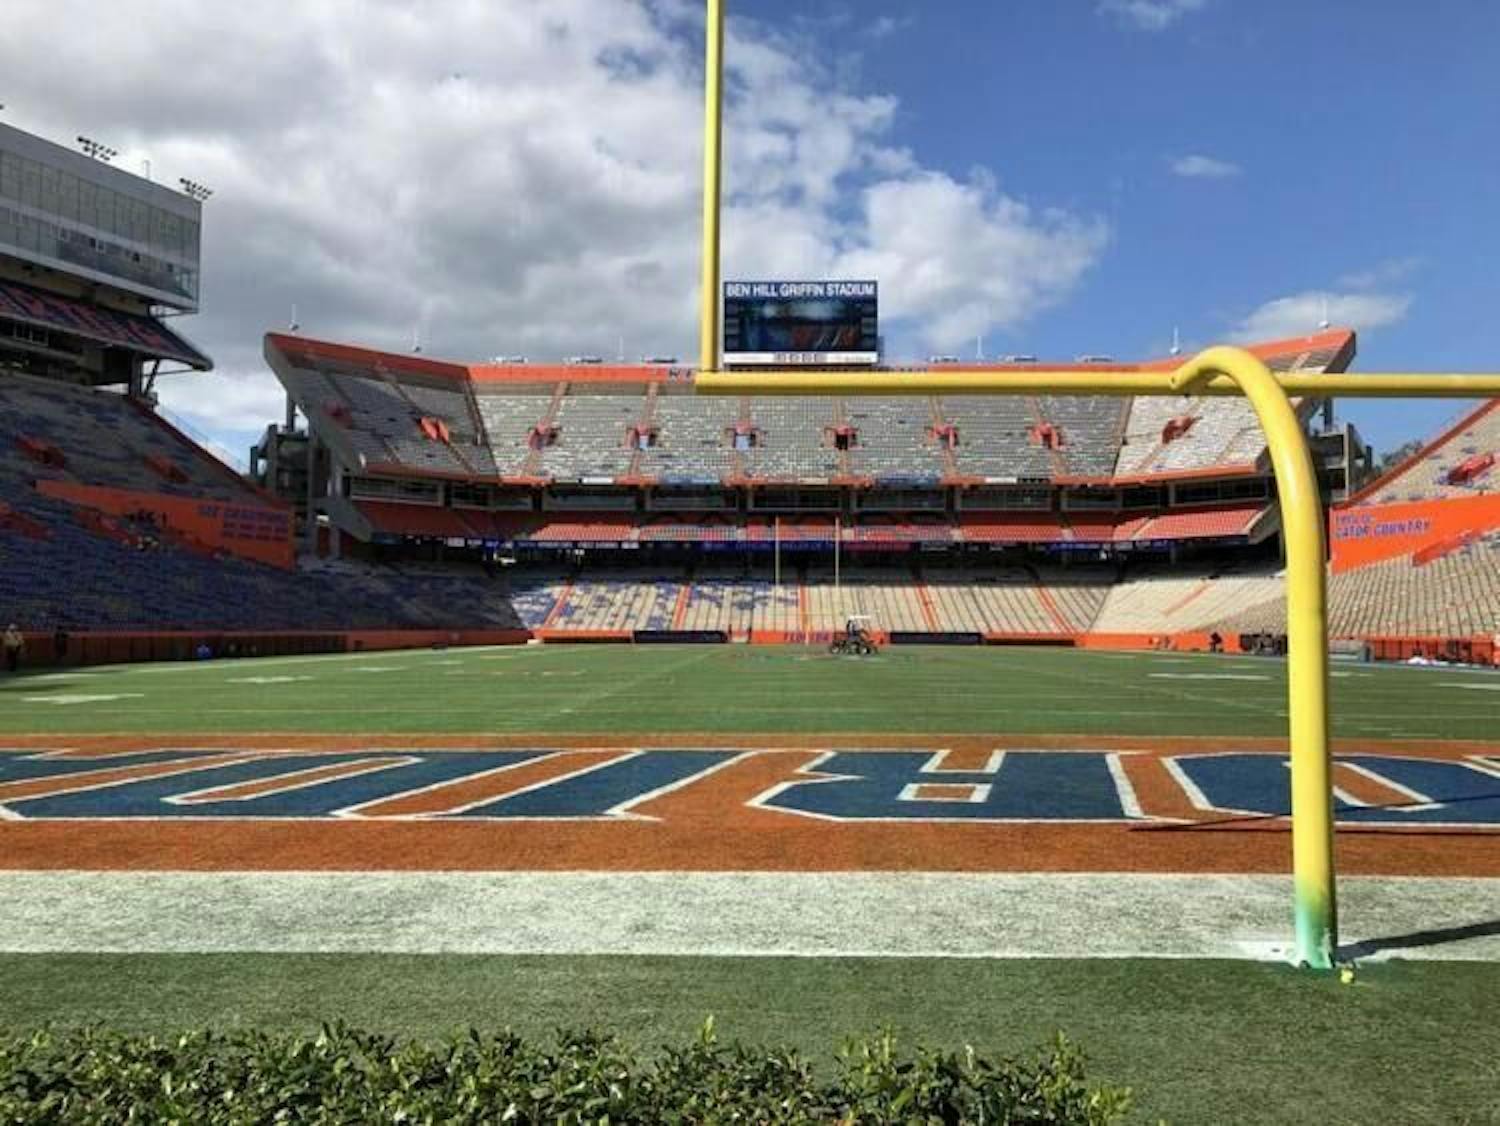 Florida football coaches addressed the growing focus on the mental health of athletes ahead of the 2021 season.